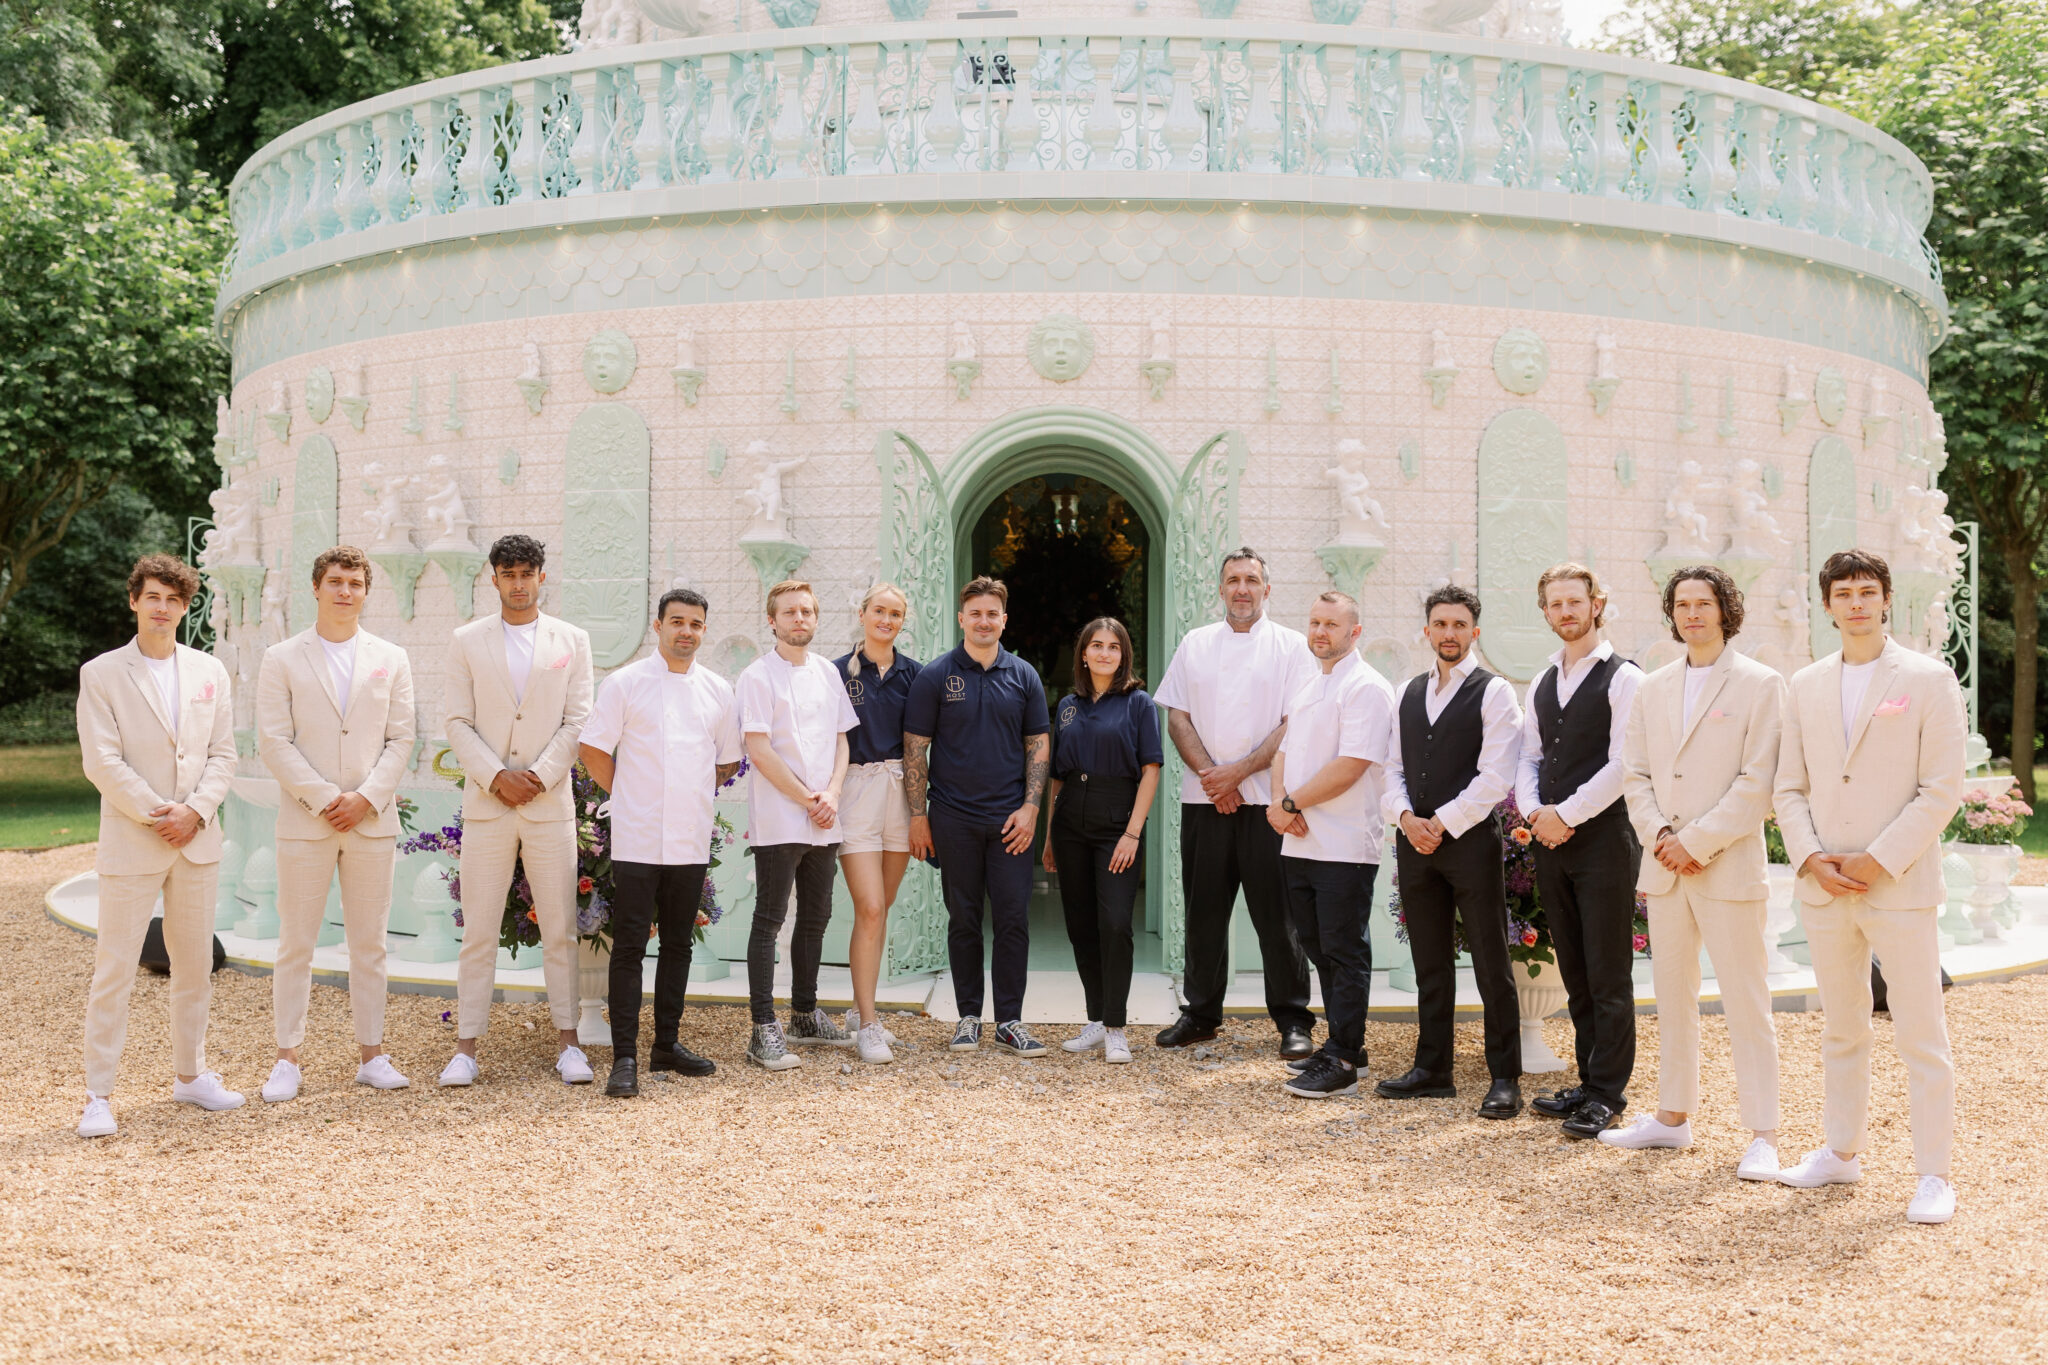 row of staff, waiters, chefs, managers in front of large cake building